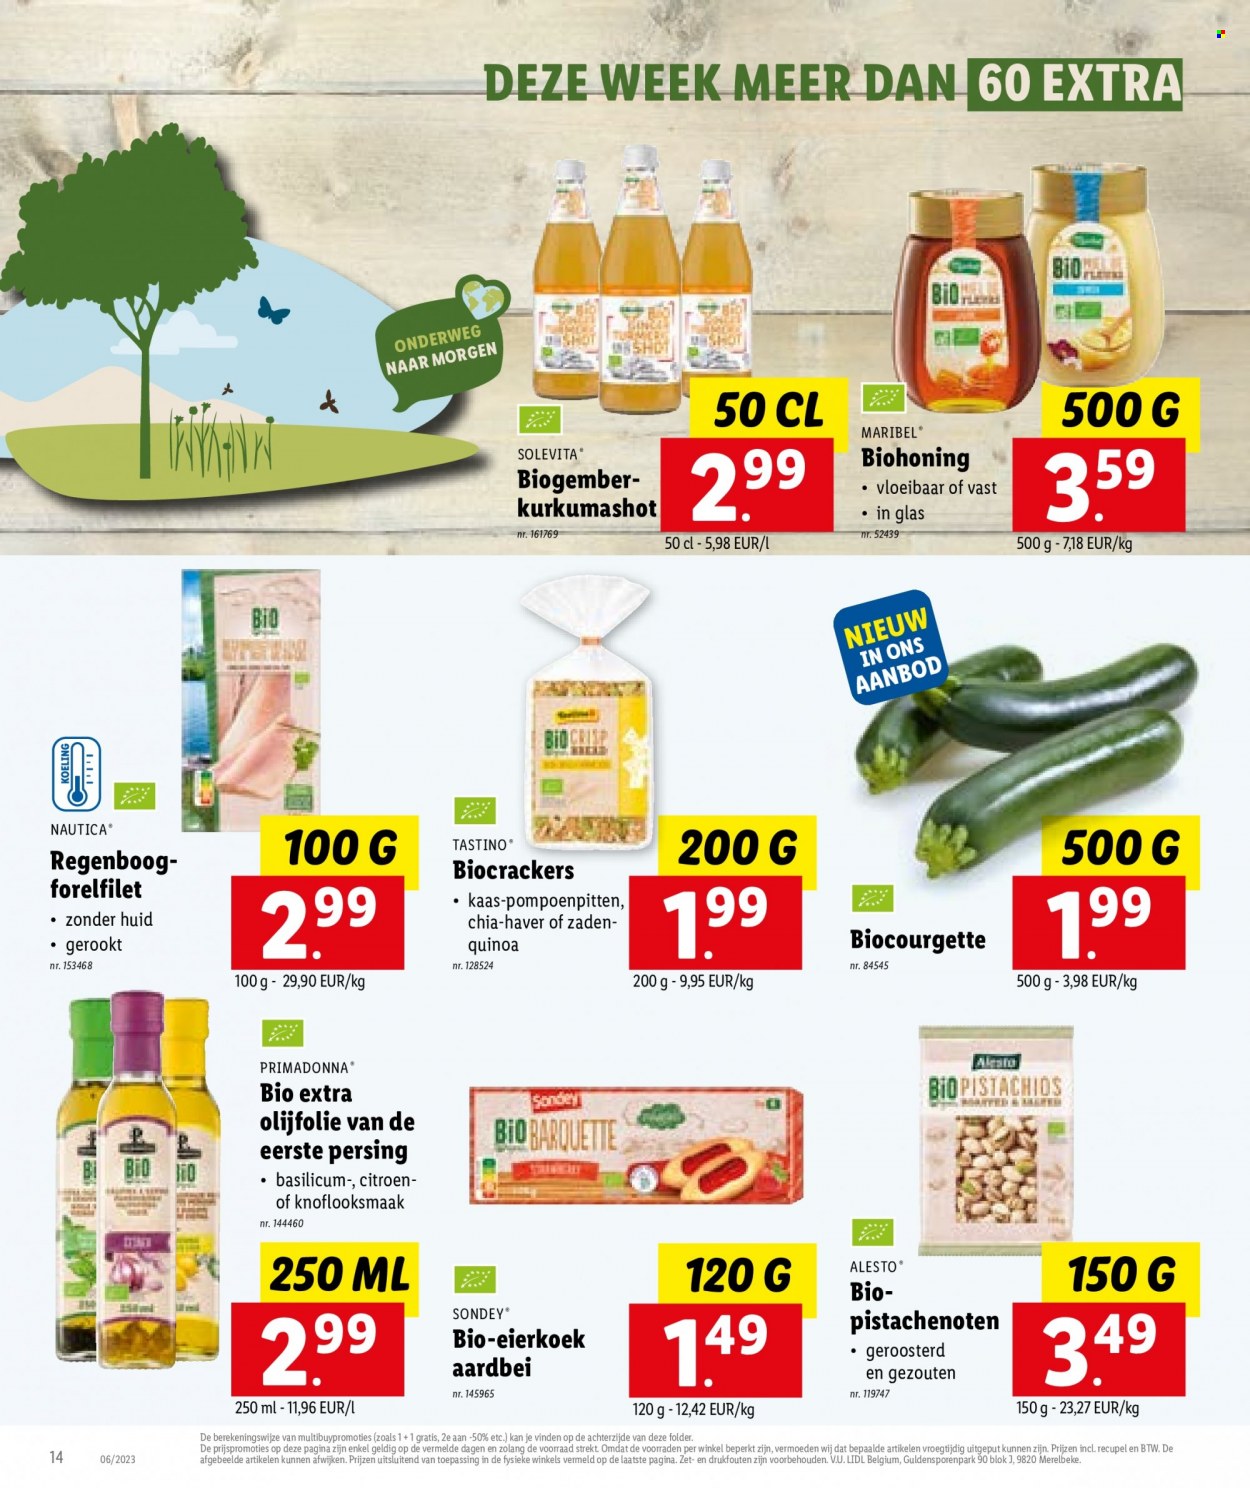 Catalogue Lidl - 6.2.2023 - 11.2.2023. Page 14.